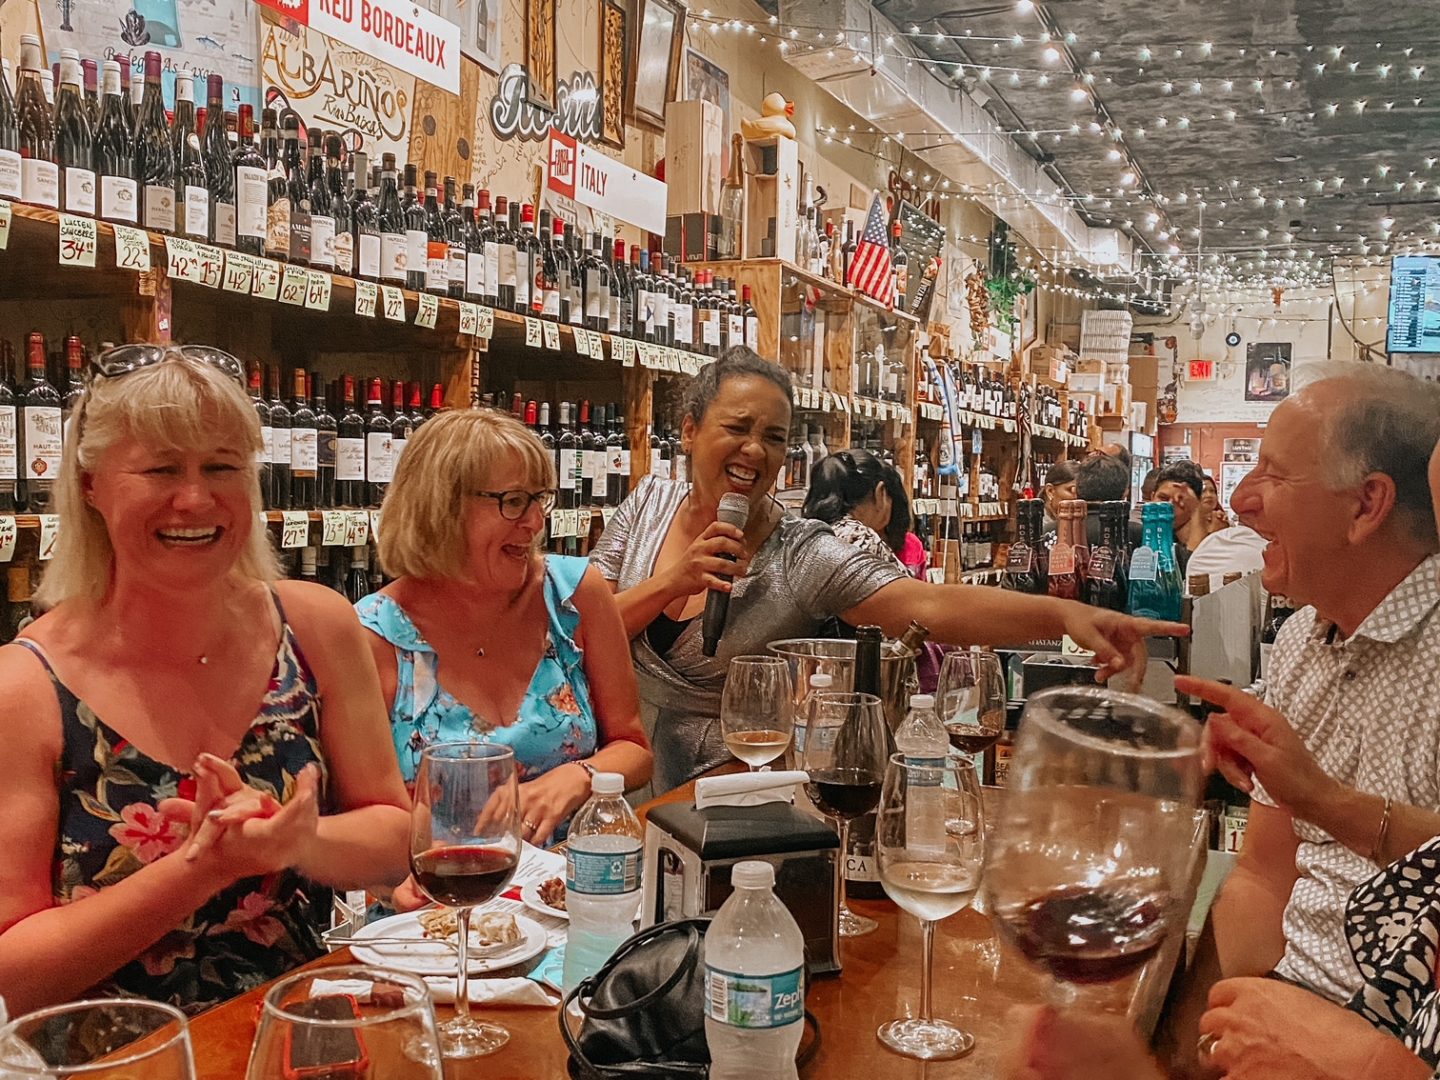 Happy Wine Calle Ocho: The most welcoming wine bar in Miami